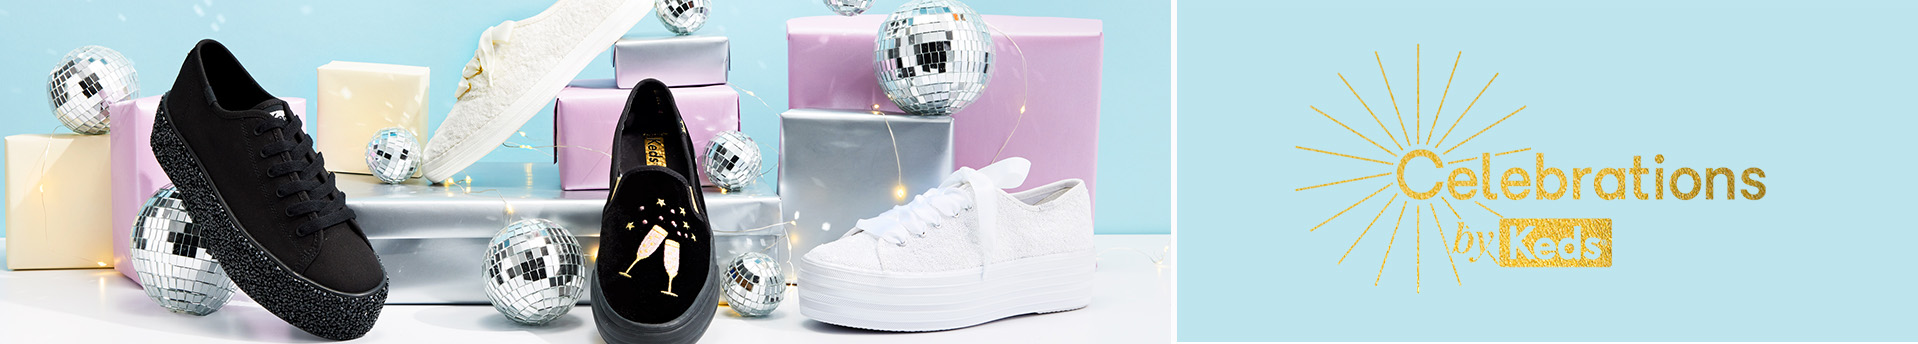 Celebrations by Keds logo. A selection of celebrations by Keds shoes with holiday gifts and ornaments.